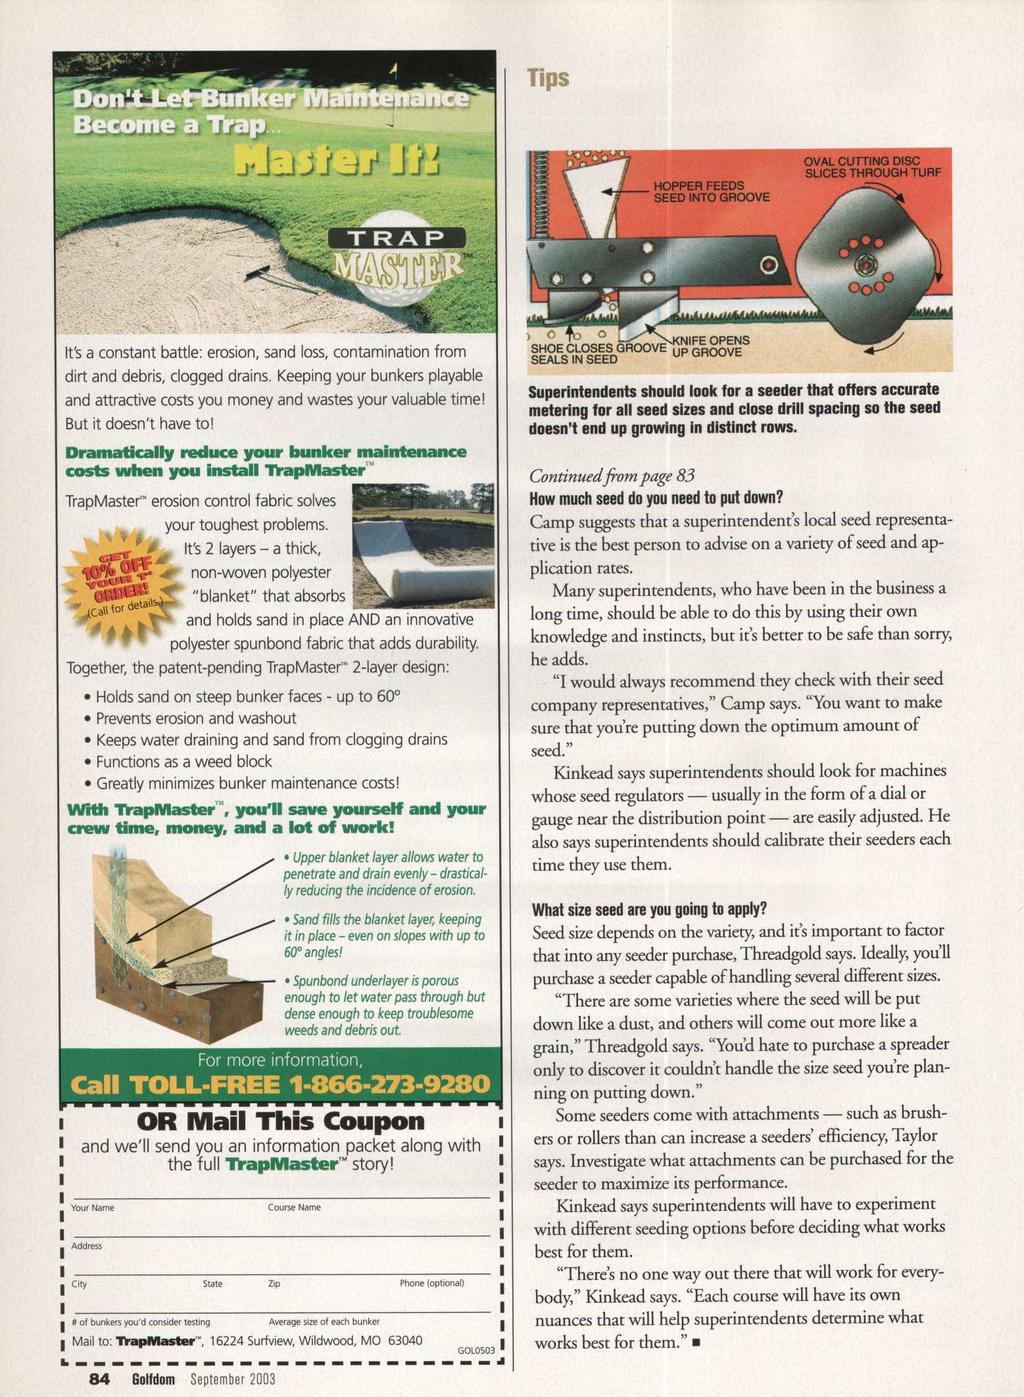 Tips It's a constant battle: erosion, sand loss, contamination from dirt and debris, clogged drains. Keeping your bunkers playable and attractive costs you money and wastes your valuable time!